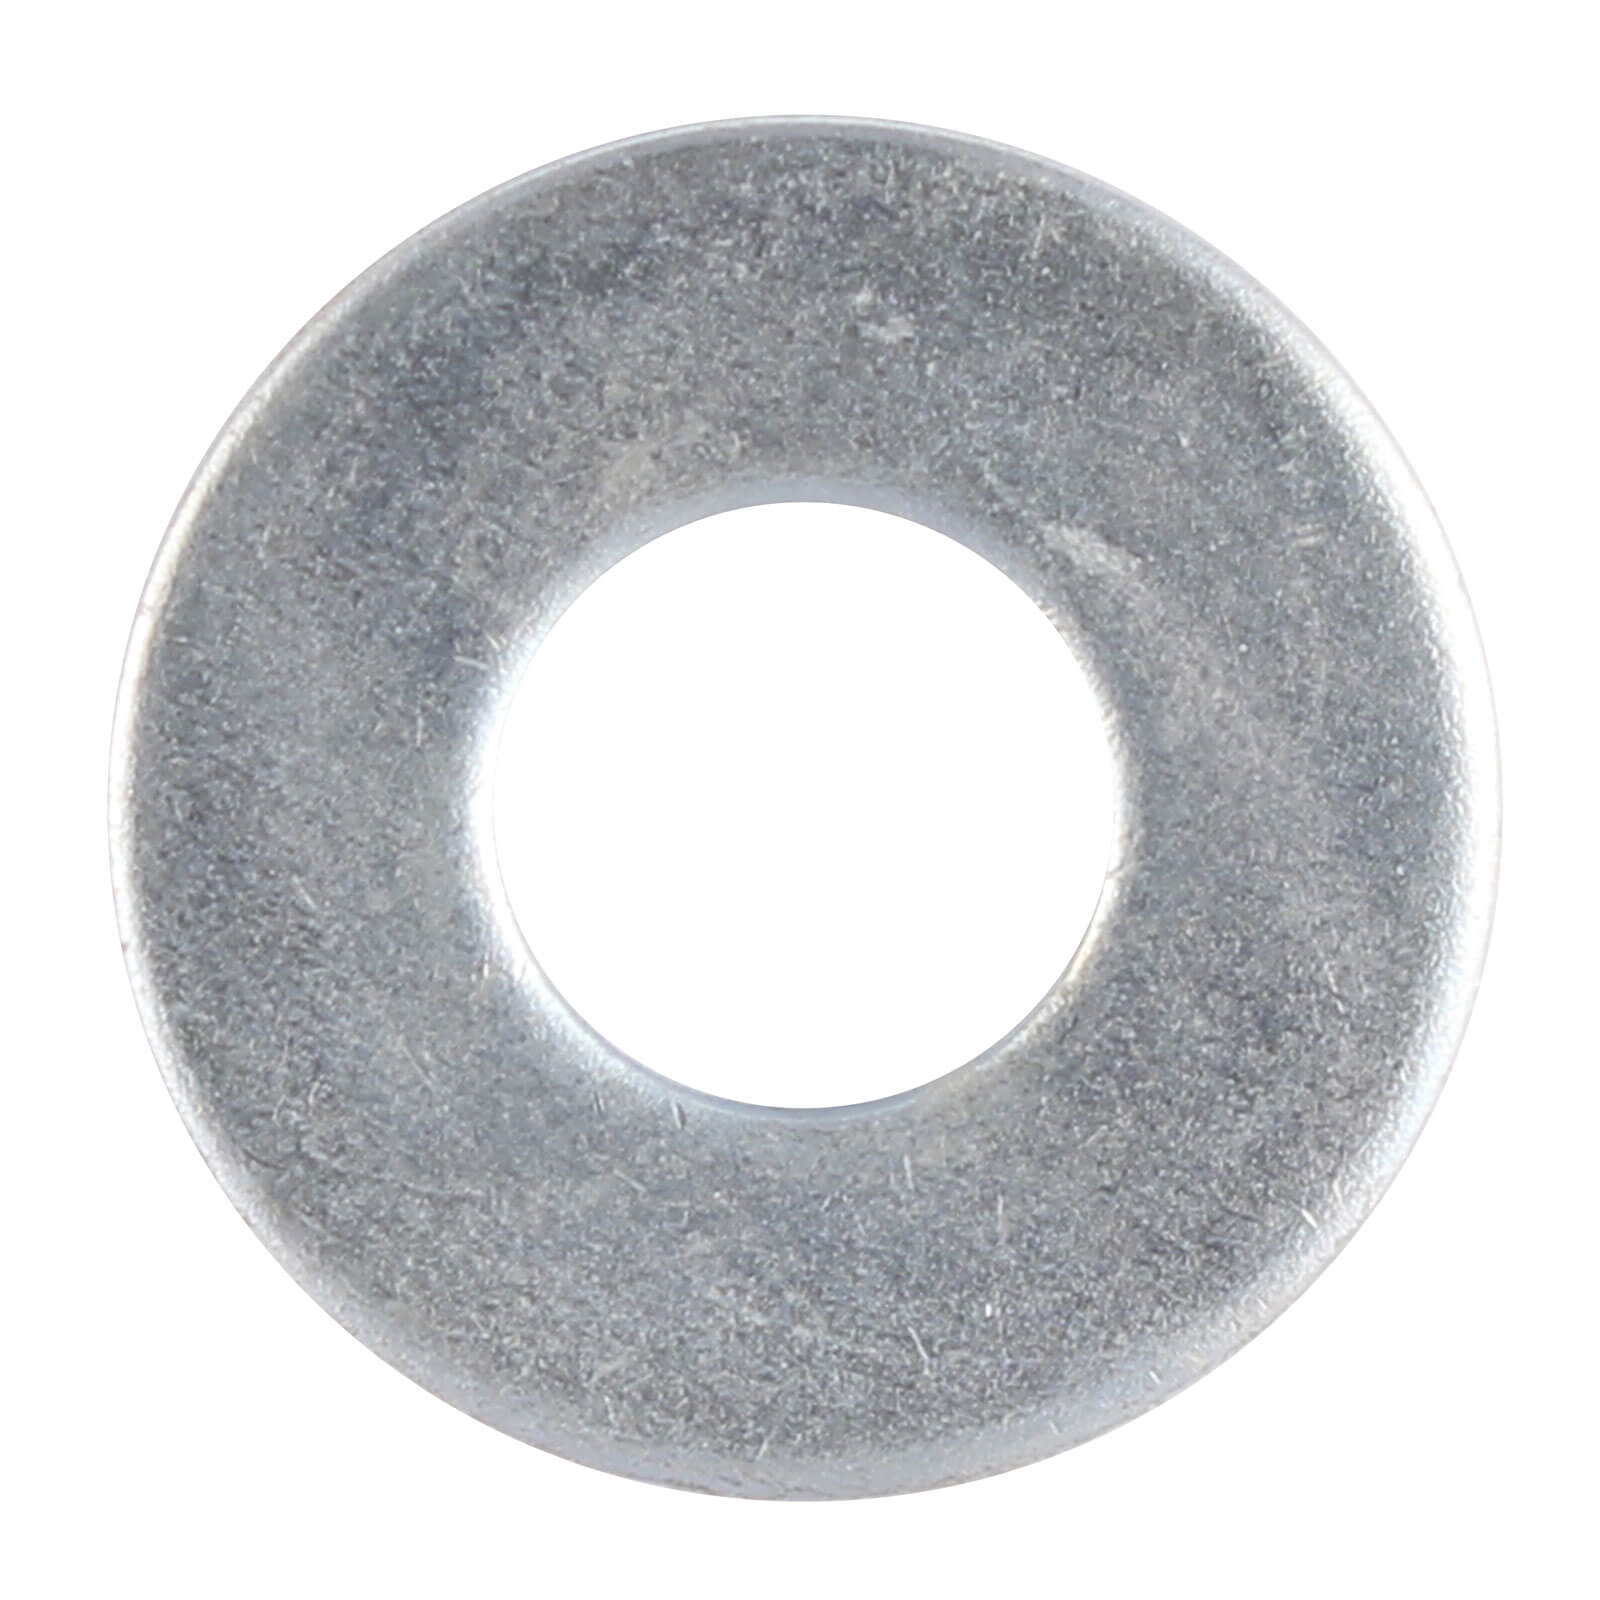 Image of Washer Stainless Steel 5mm Pack of 50